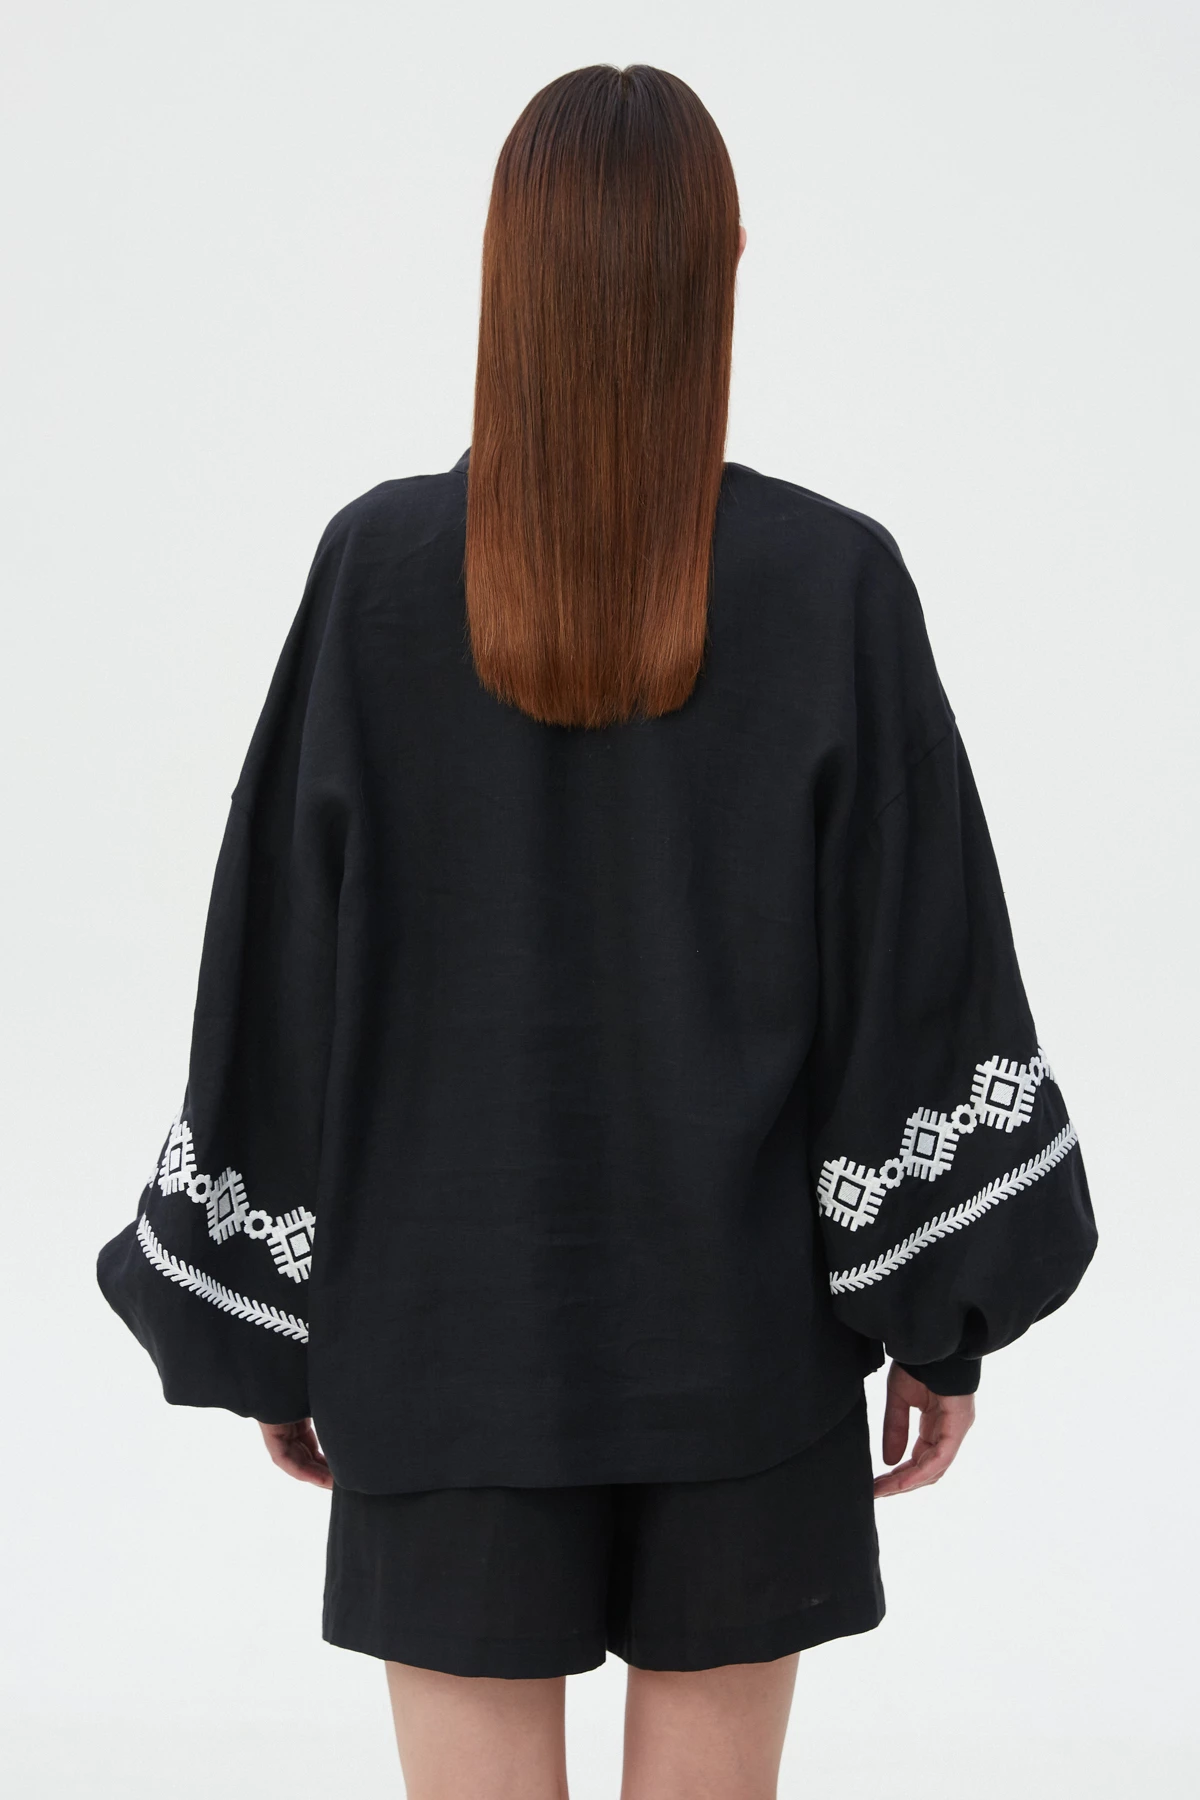 Black linen vyshyvanka shirt with floral embroidery, photo 4